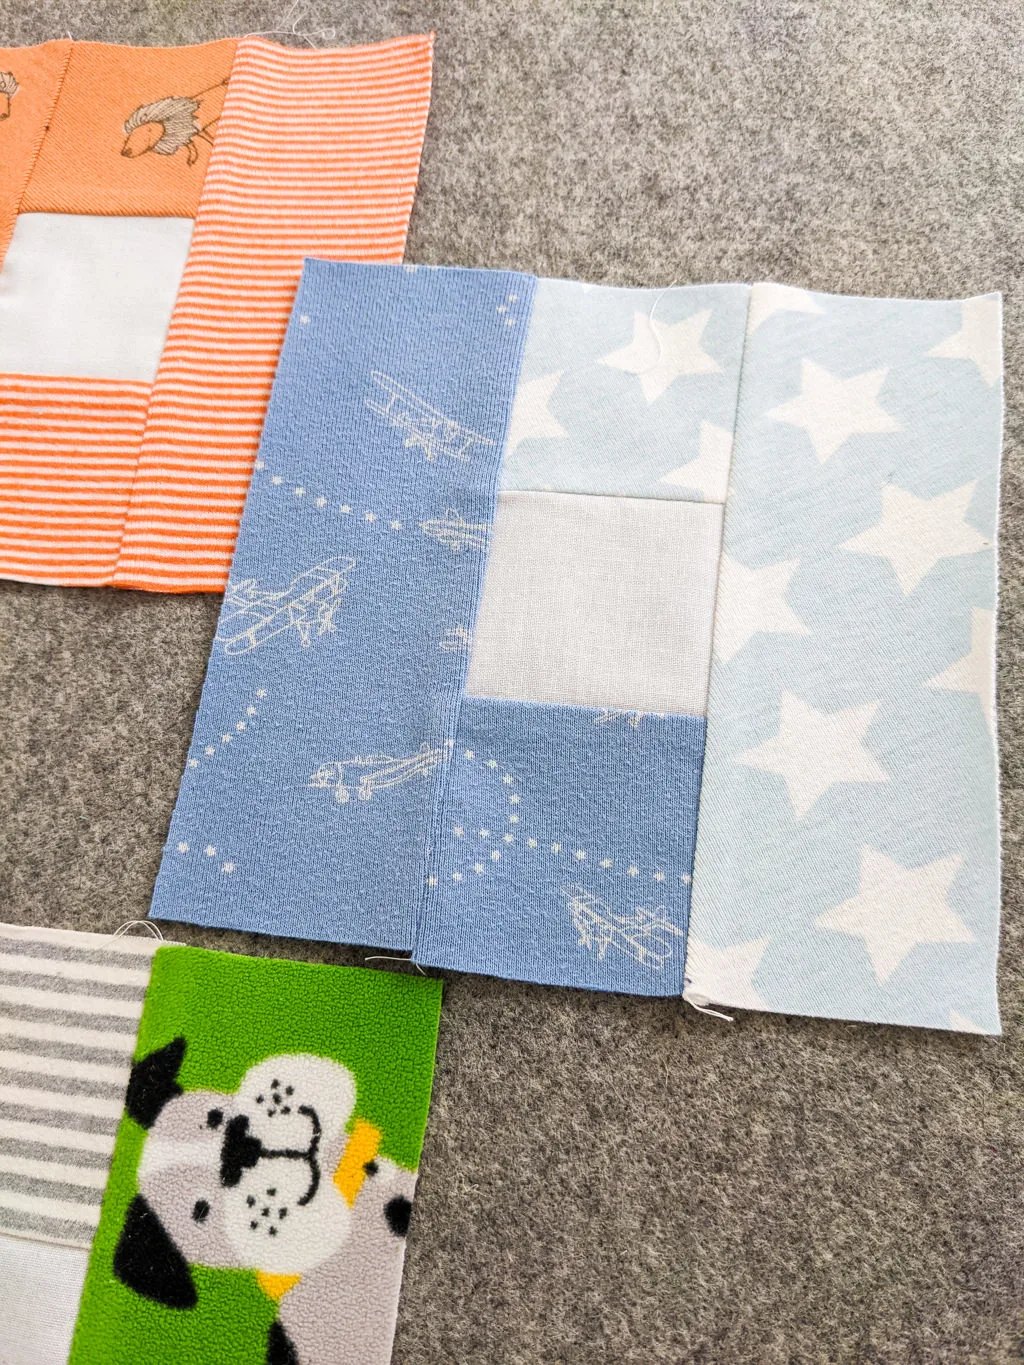 Double letter L-quilt blocks from baby clothes